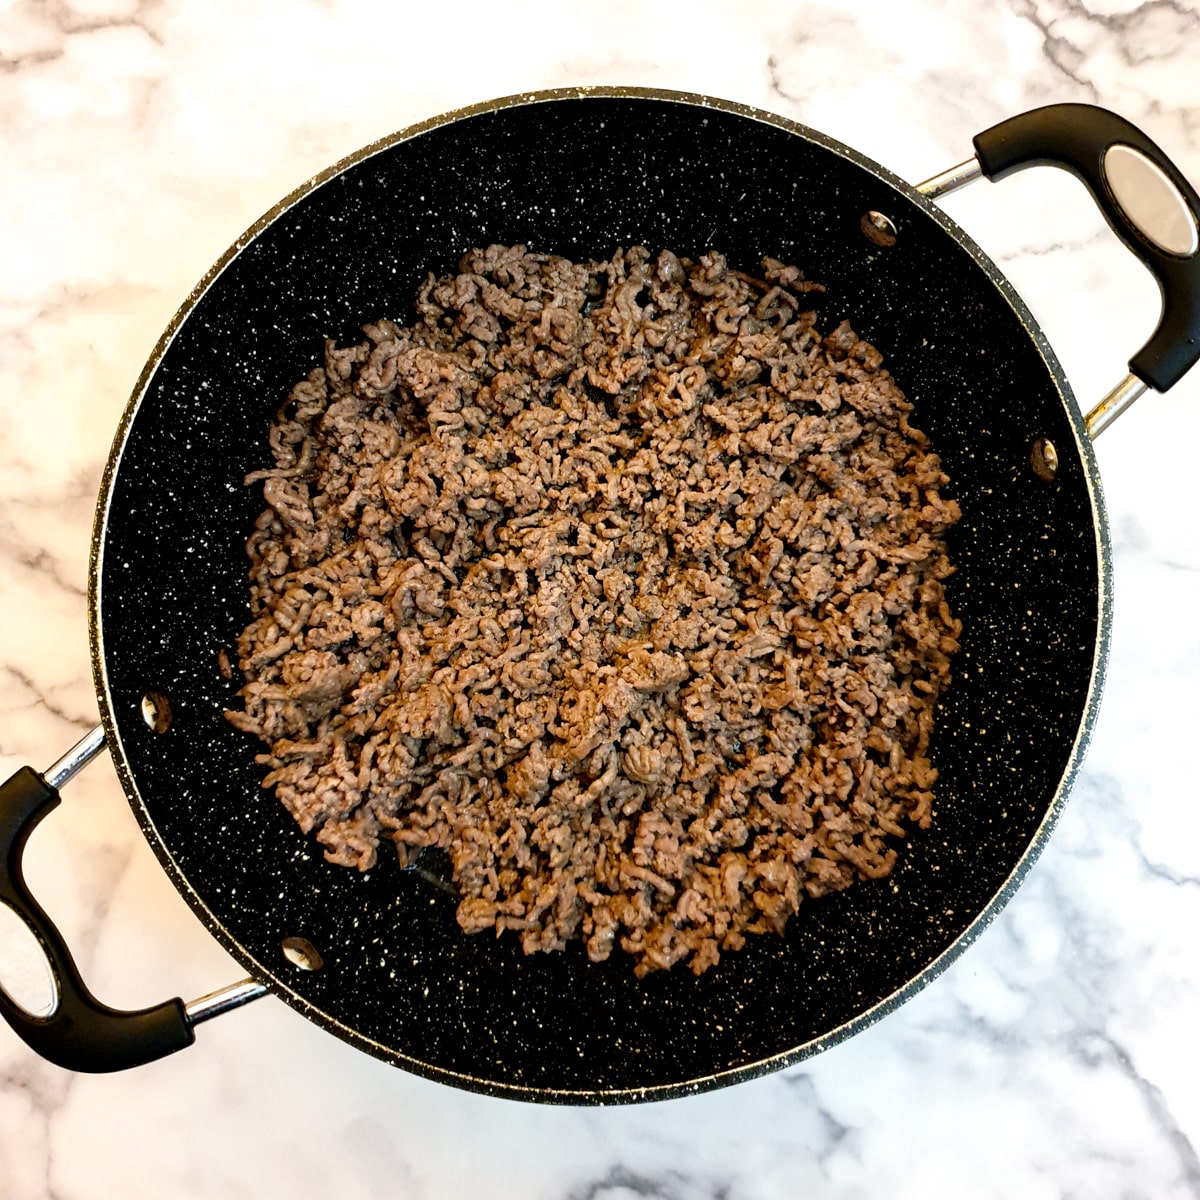 Beef mince being fried in a large frying pan.